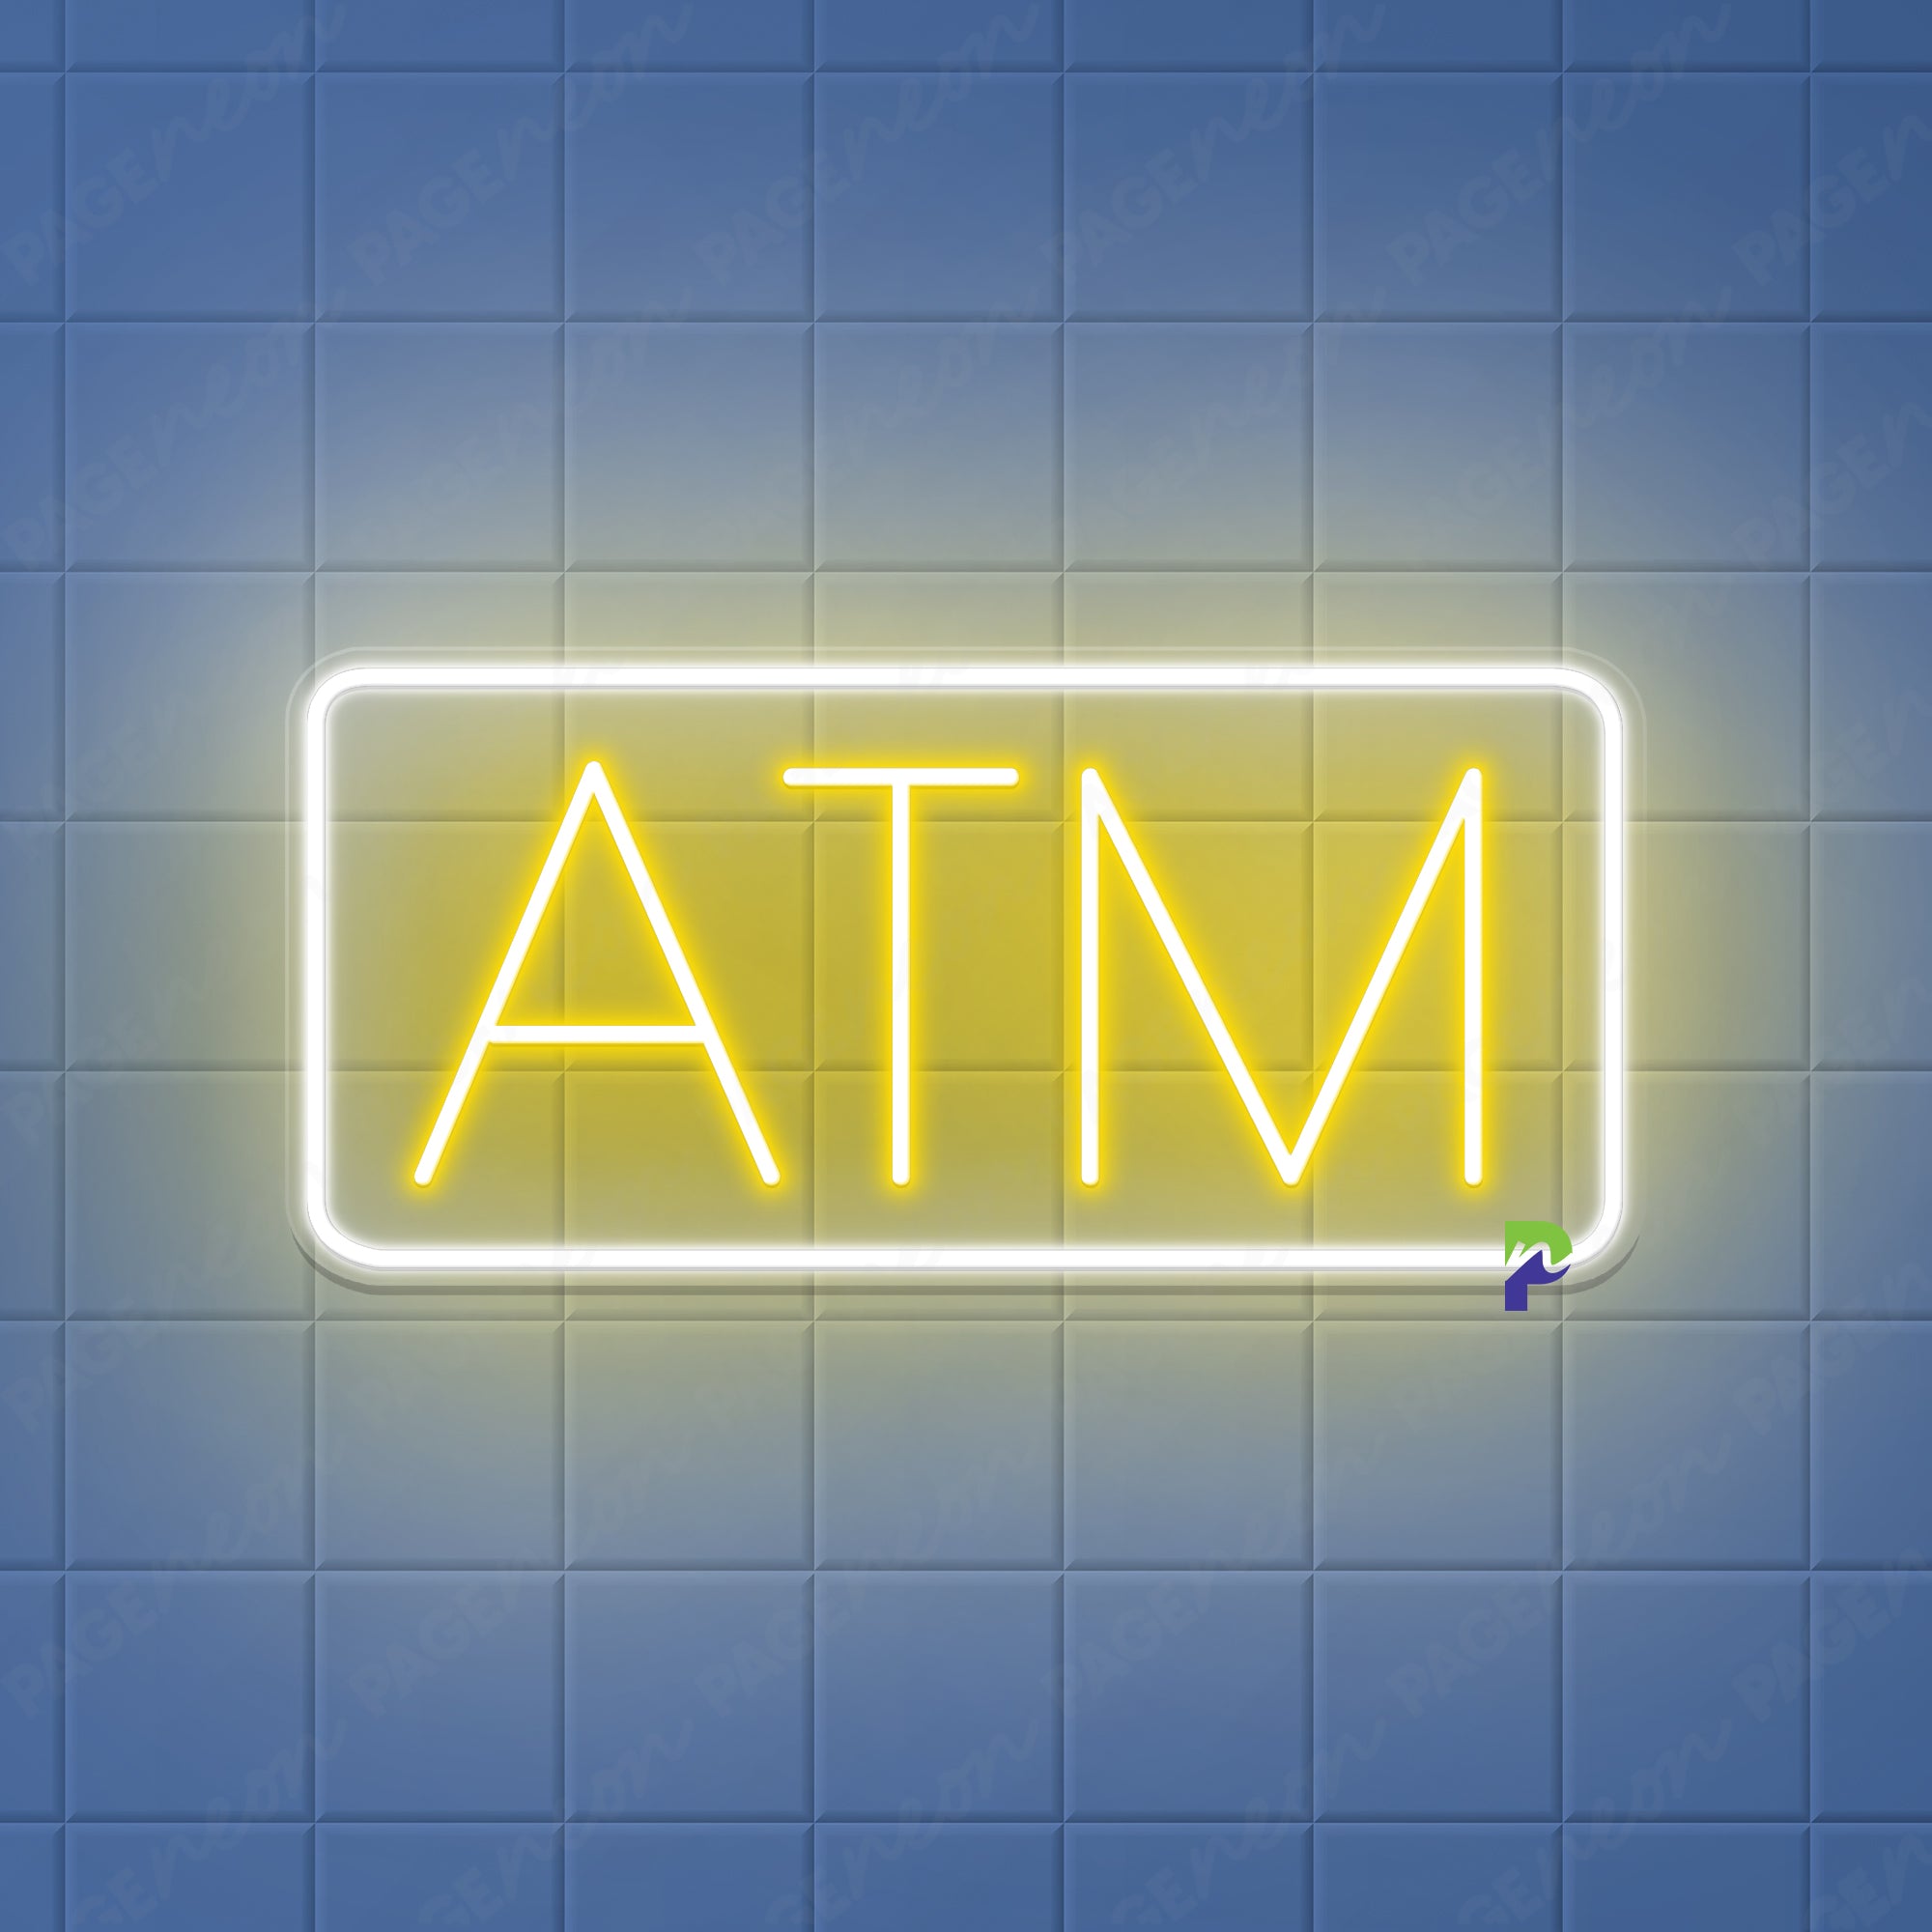 ATM Neon Sign Simple Led Light